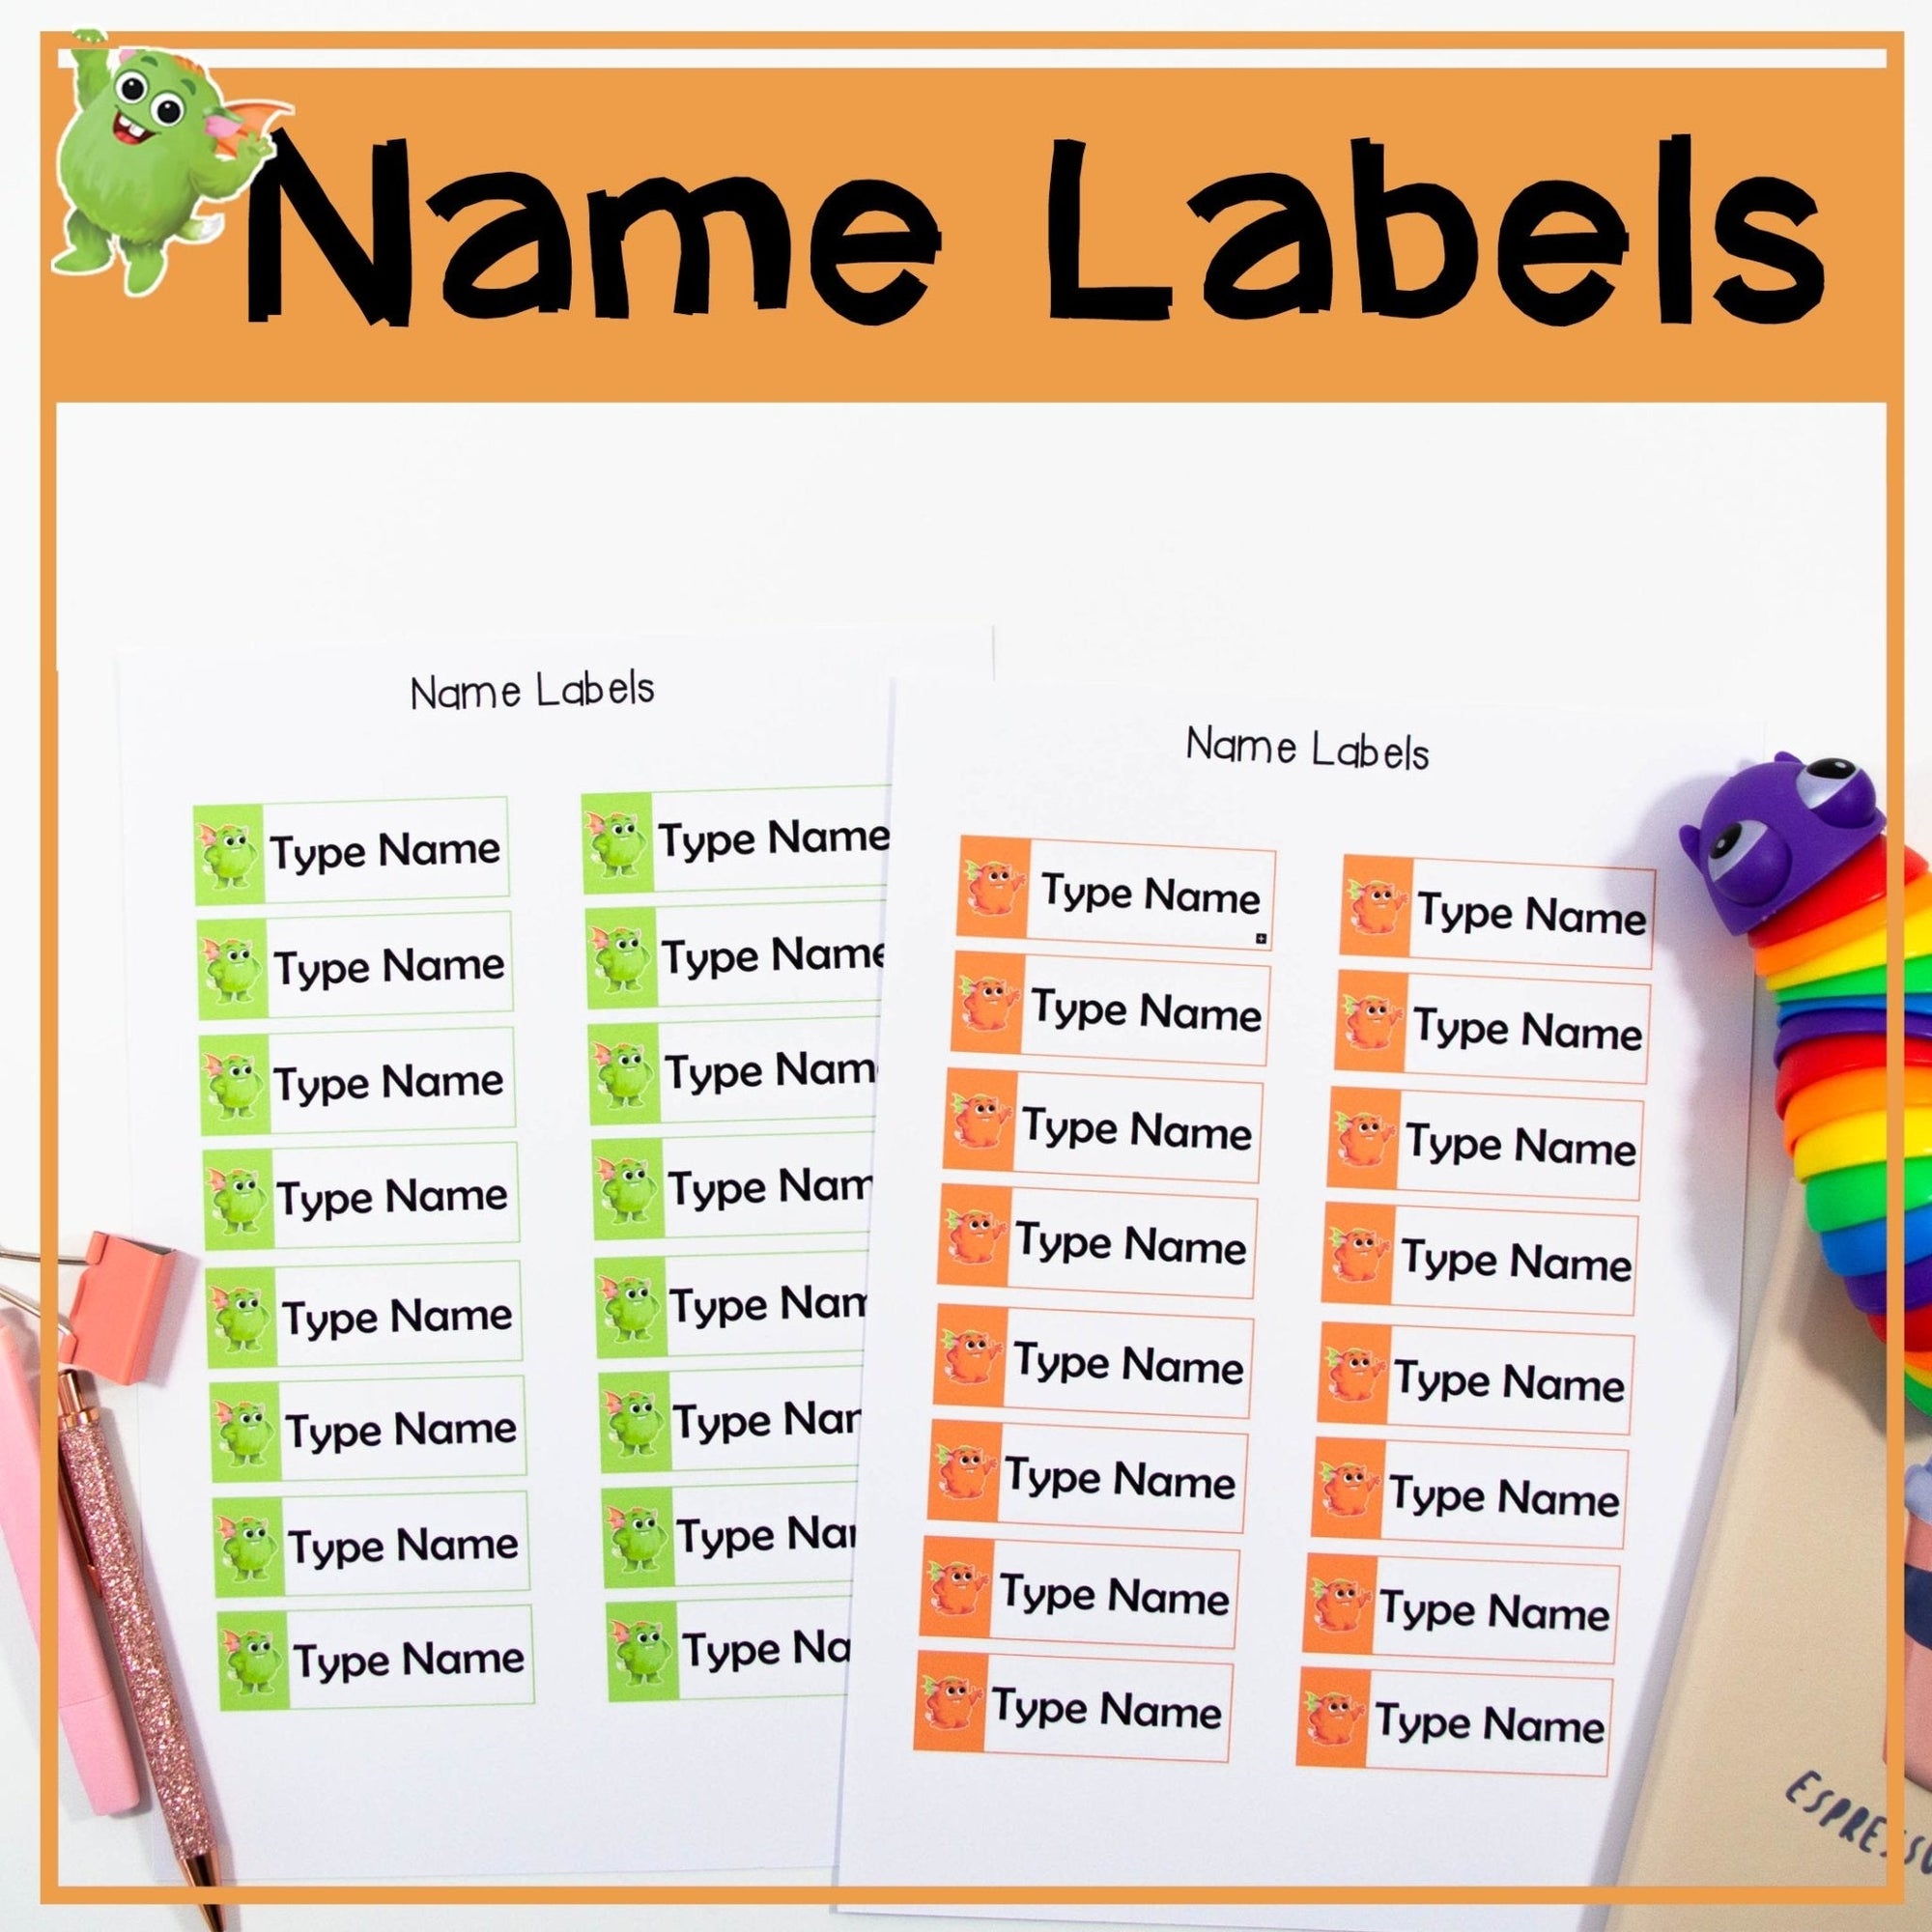 Name Labels - Orange and Green - Your Teacher's Pet Creature